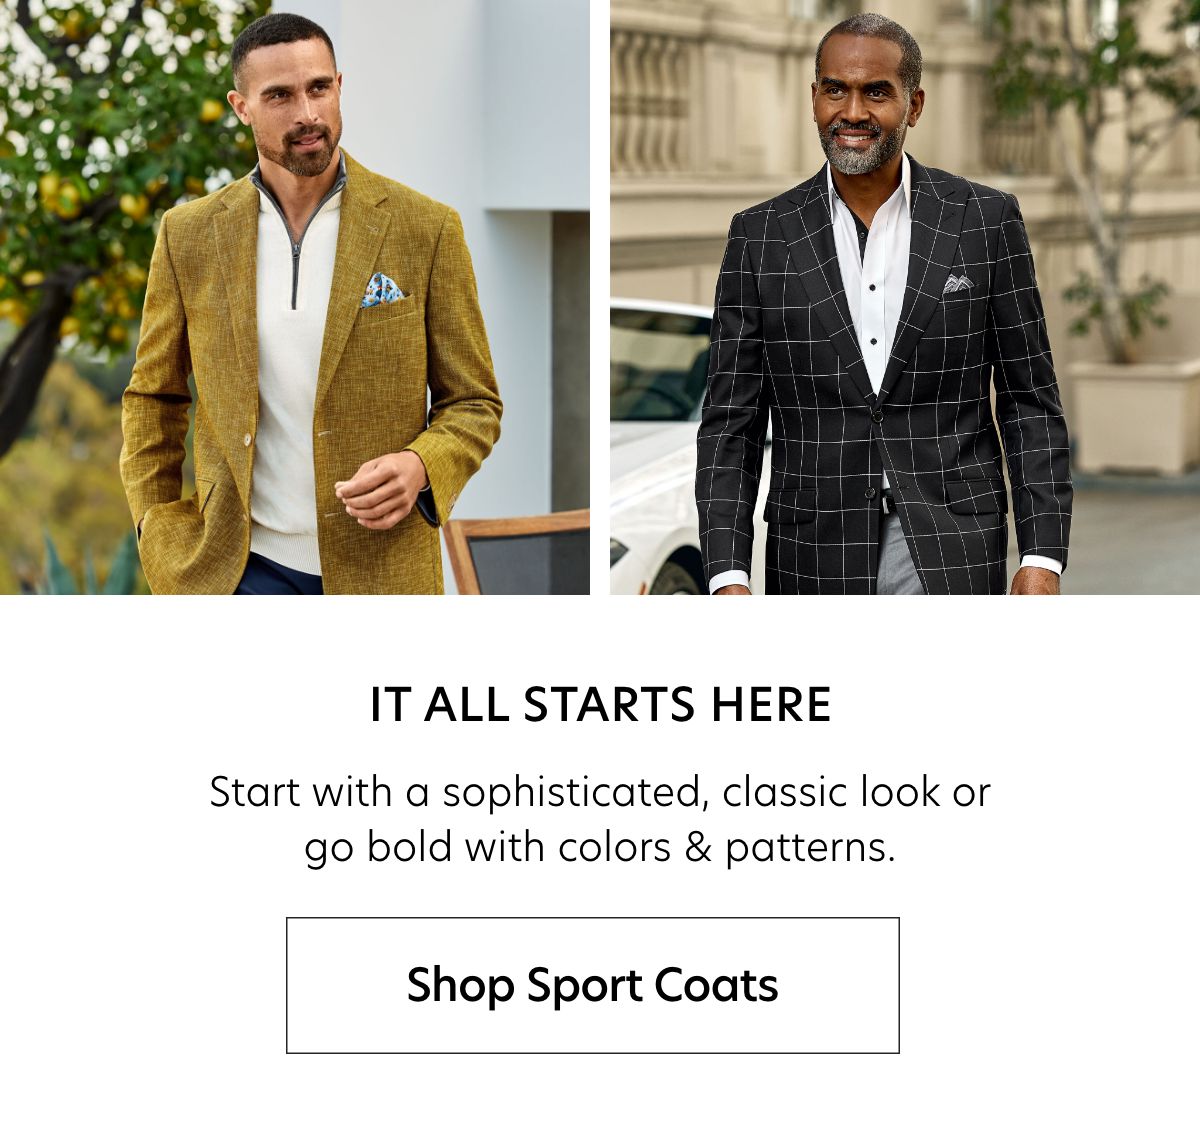  IT ALL STARTS HERE Start with a sophisticated, classic look or go bold with colors patterns. Shop Sport Coats 